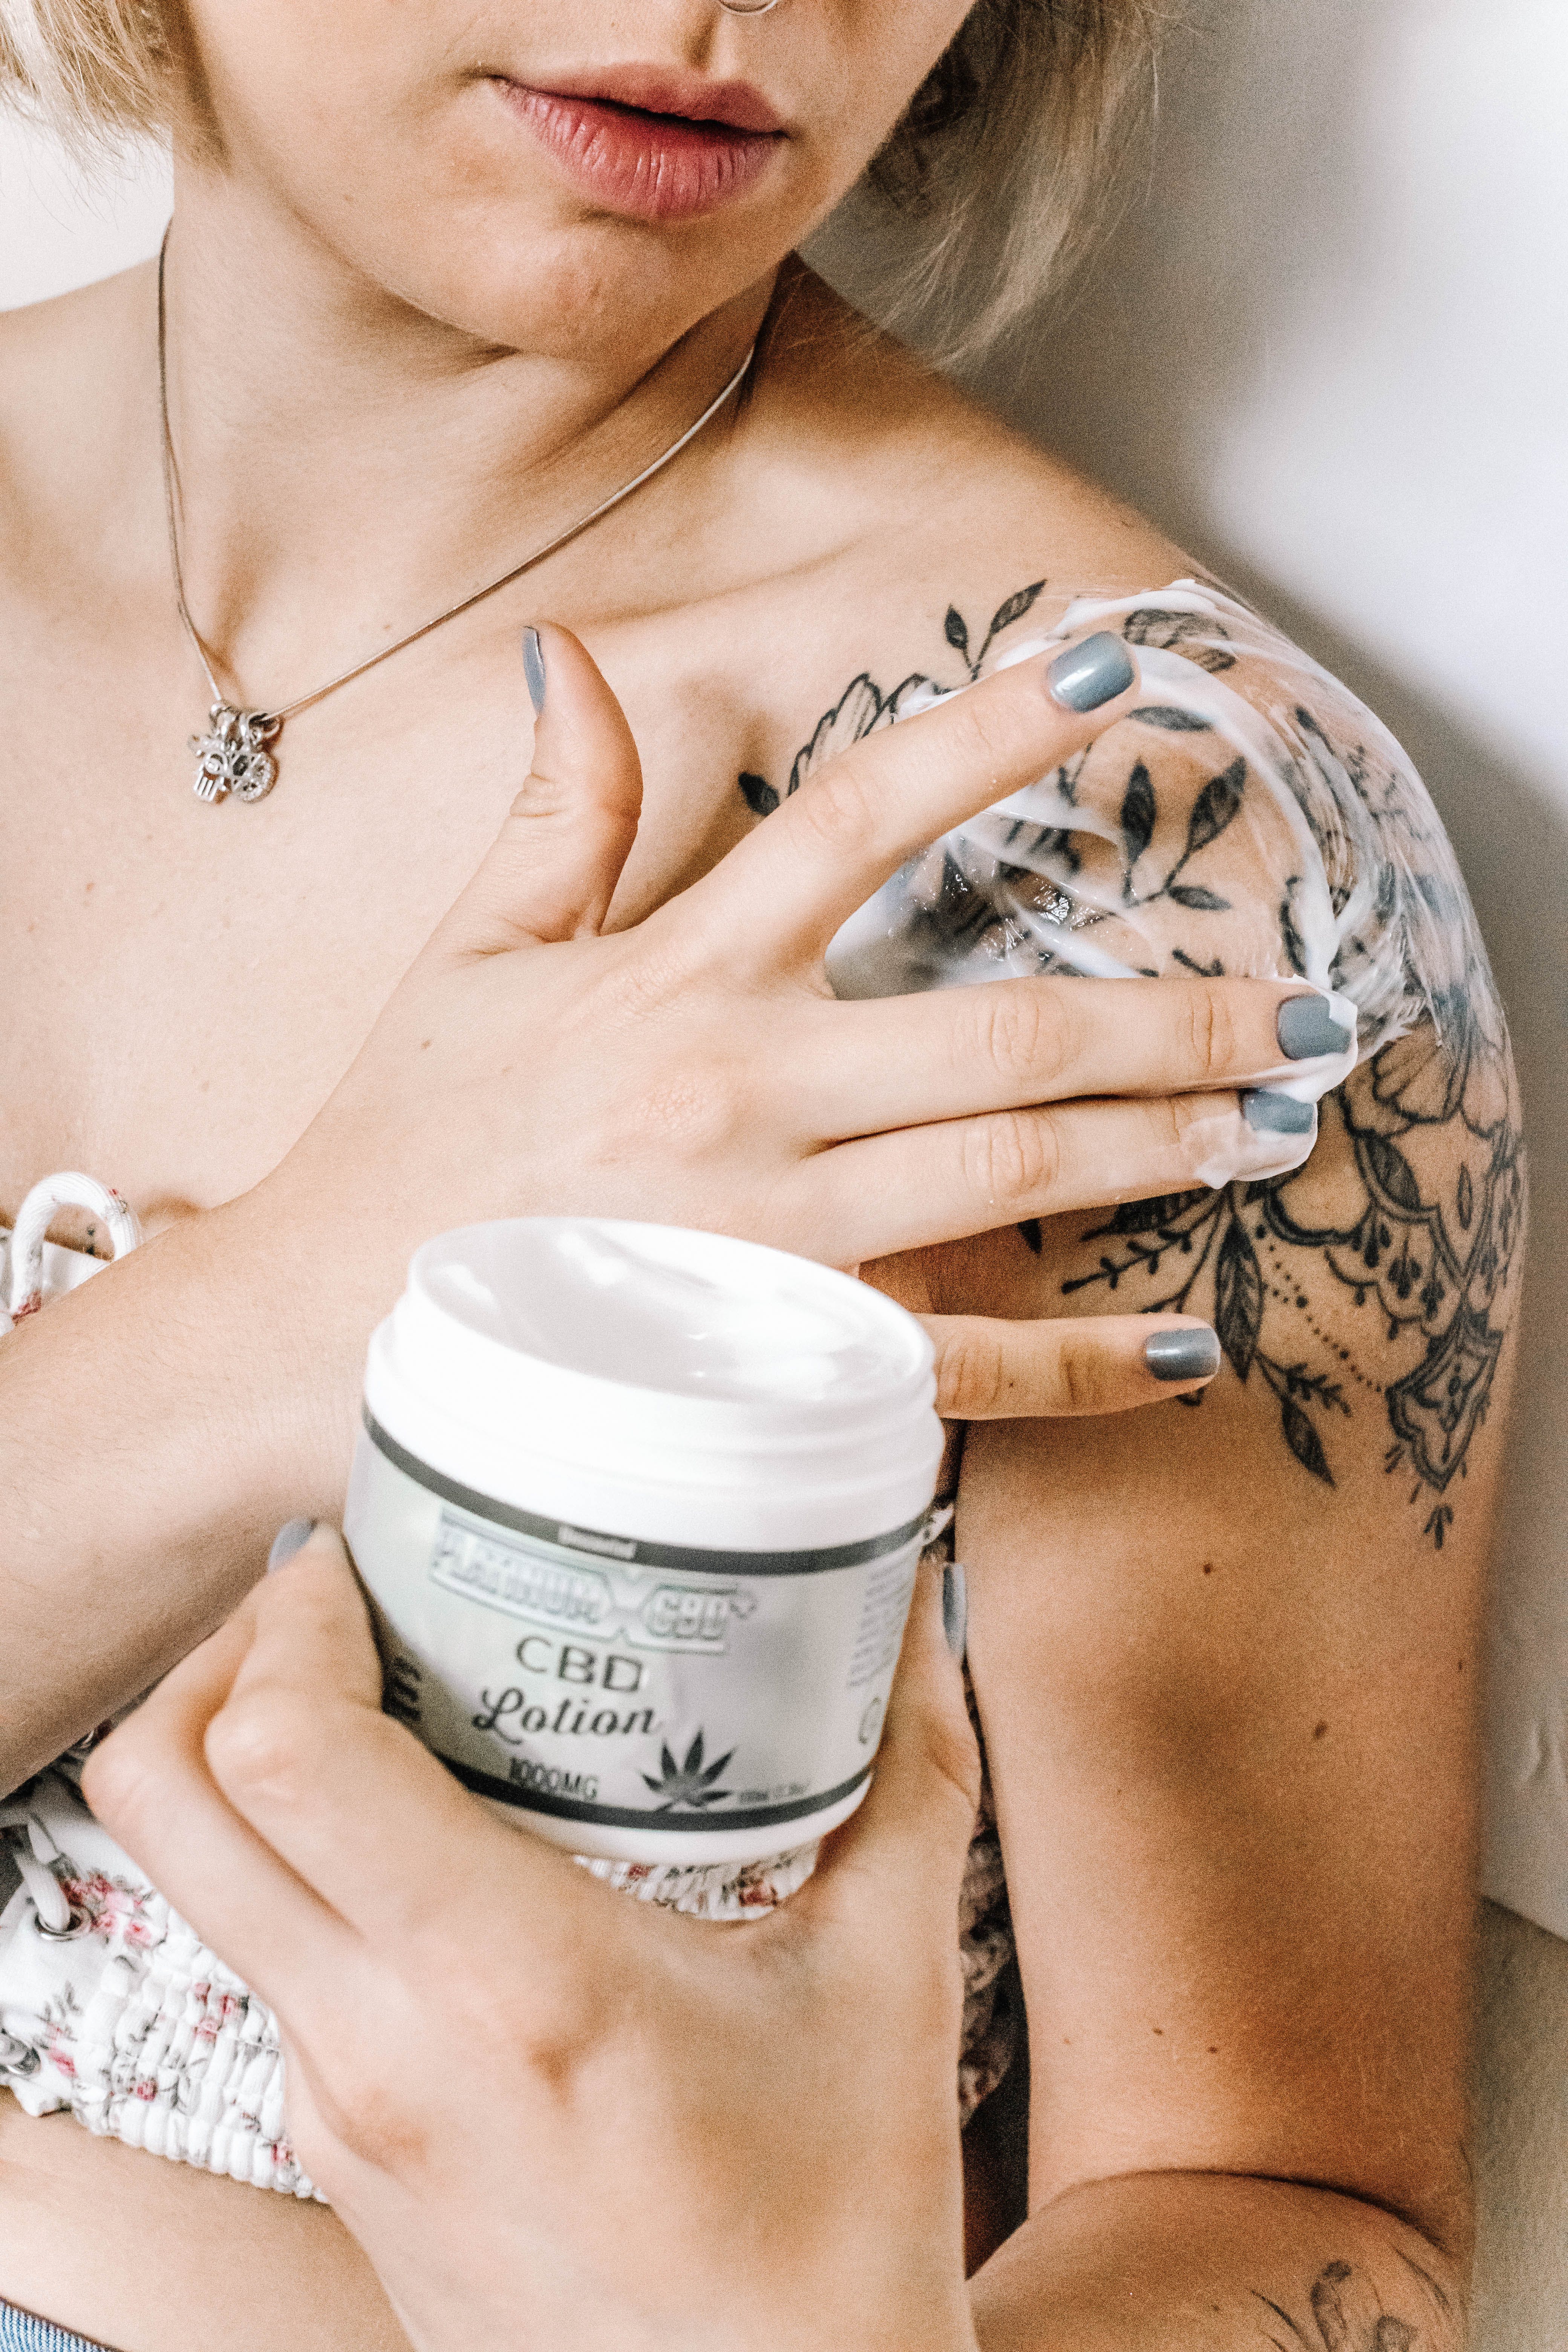 A woman taking care of a new tattoo | Source: Pexels